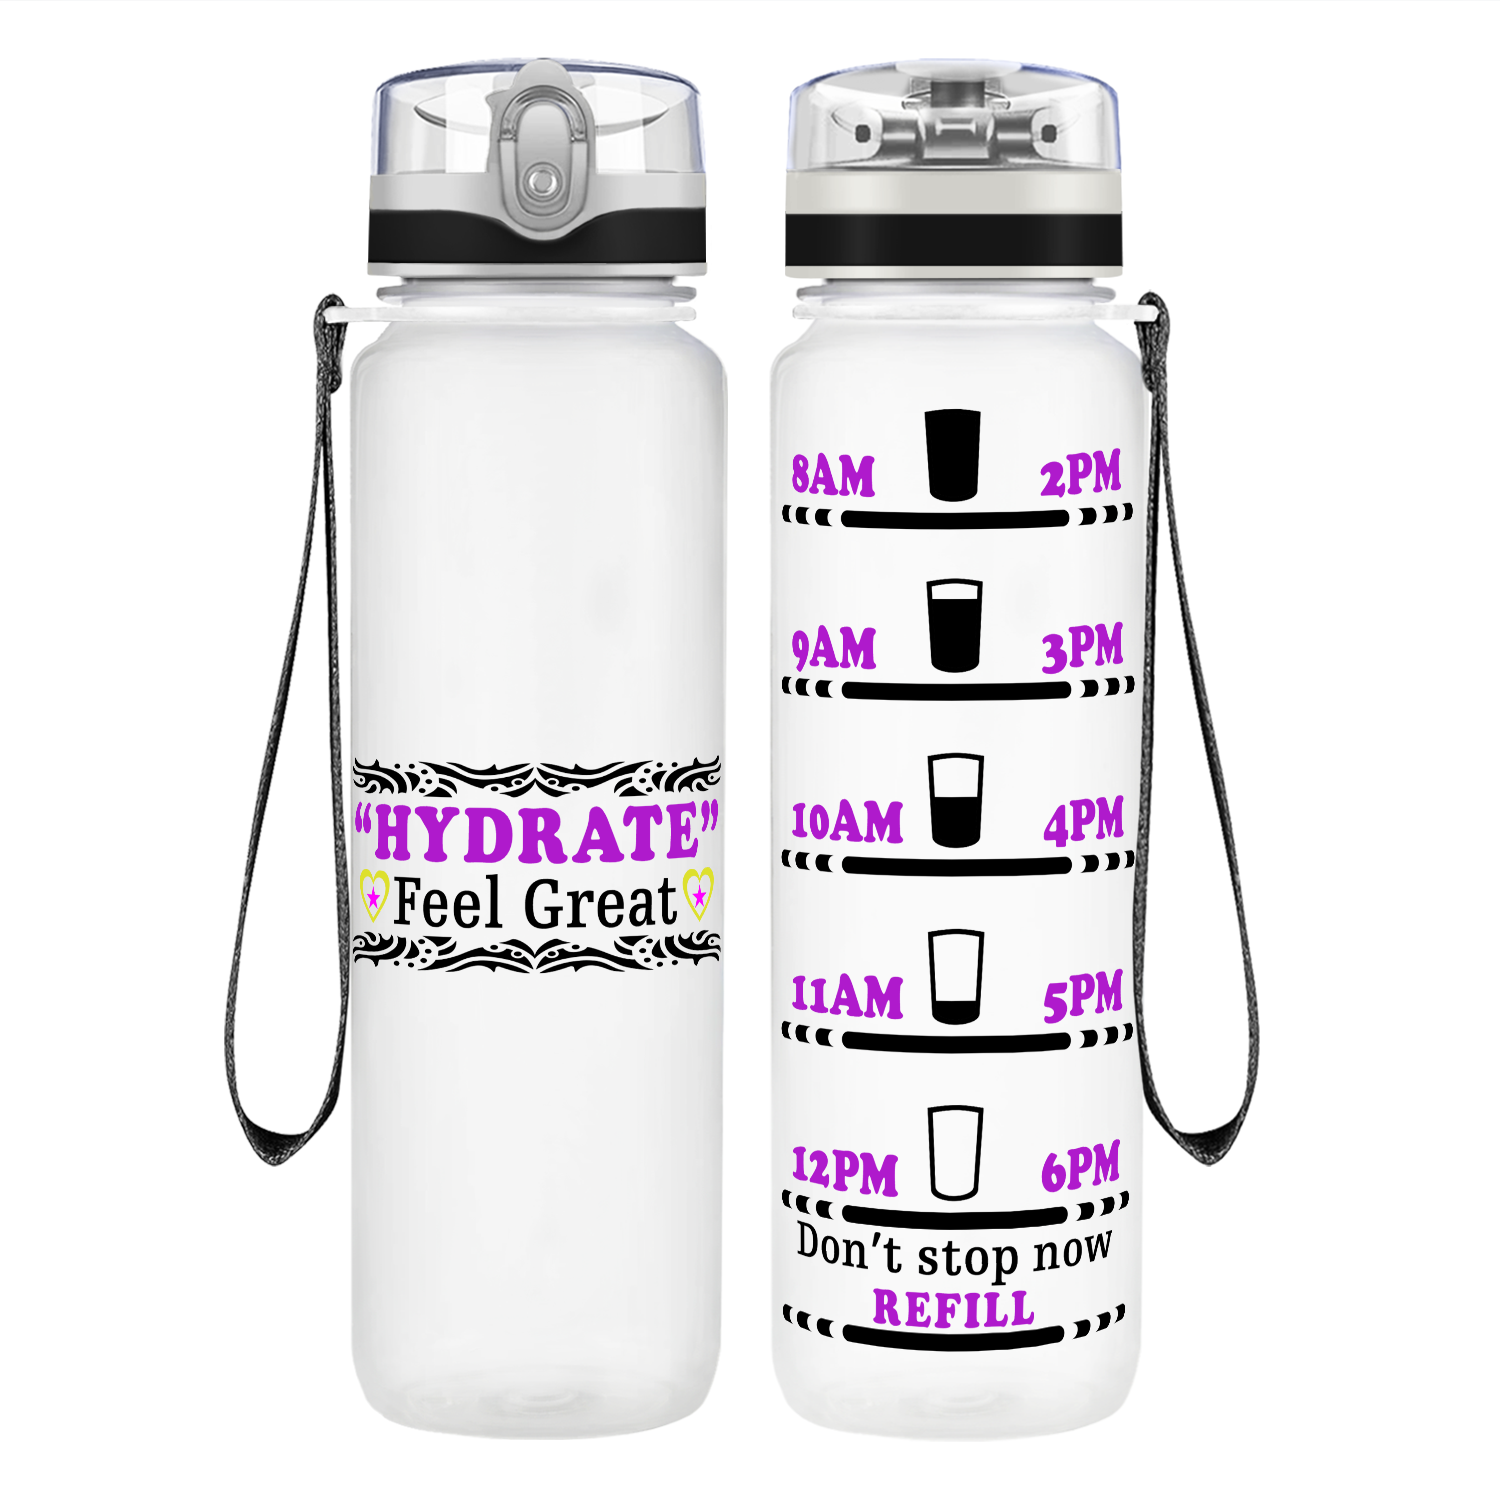 Hydrate to Feel Great on 32 oz Motivational Tracking Water Bottle